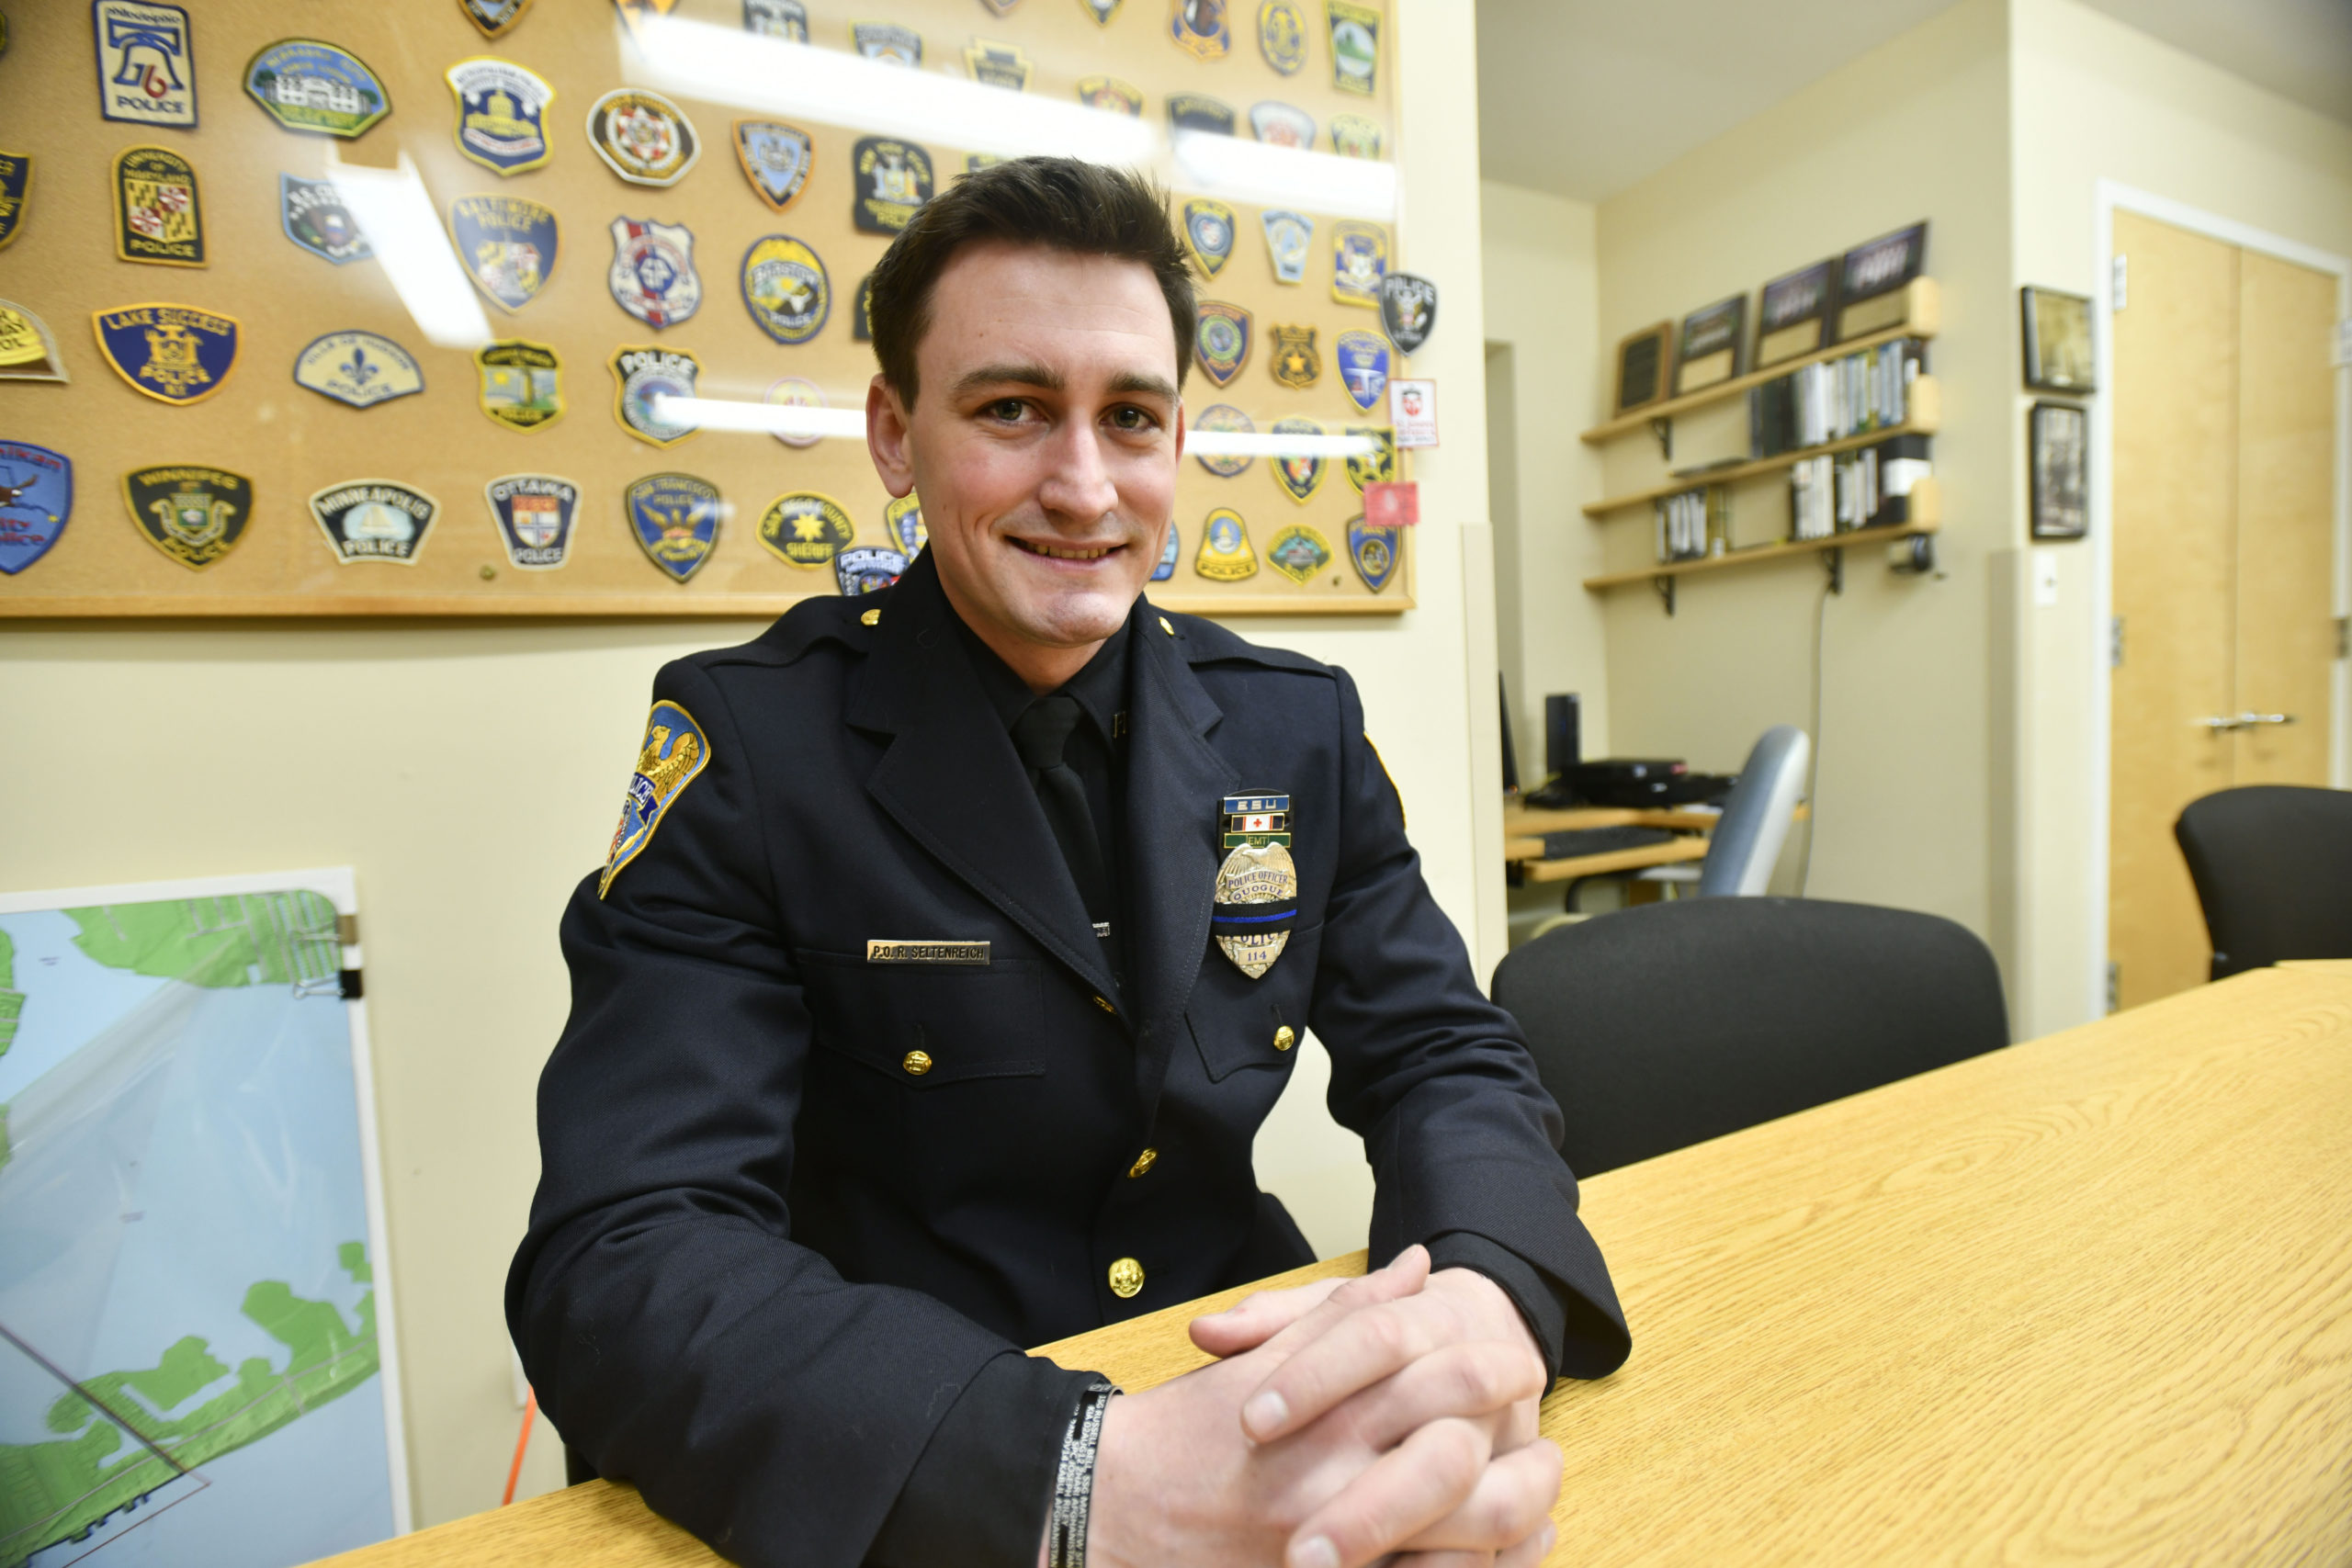 Ronan Seltenreich, a Westhampton Beach High School graduate and Army veteran, was named Officer of the Year by the Quogue Village Police Department.     DANA SHAW